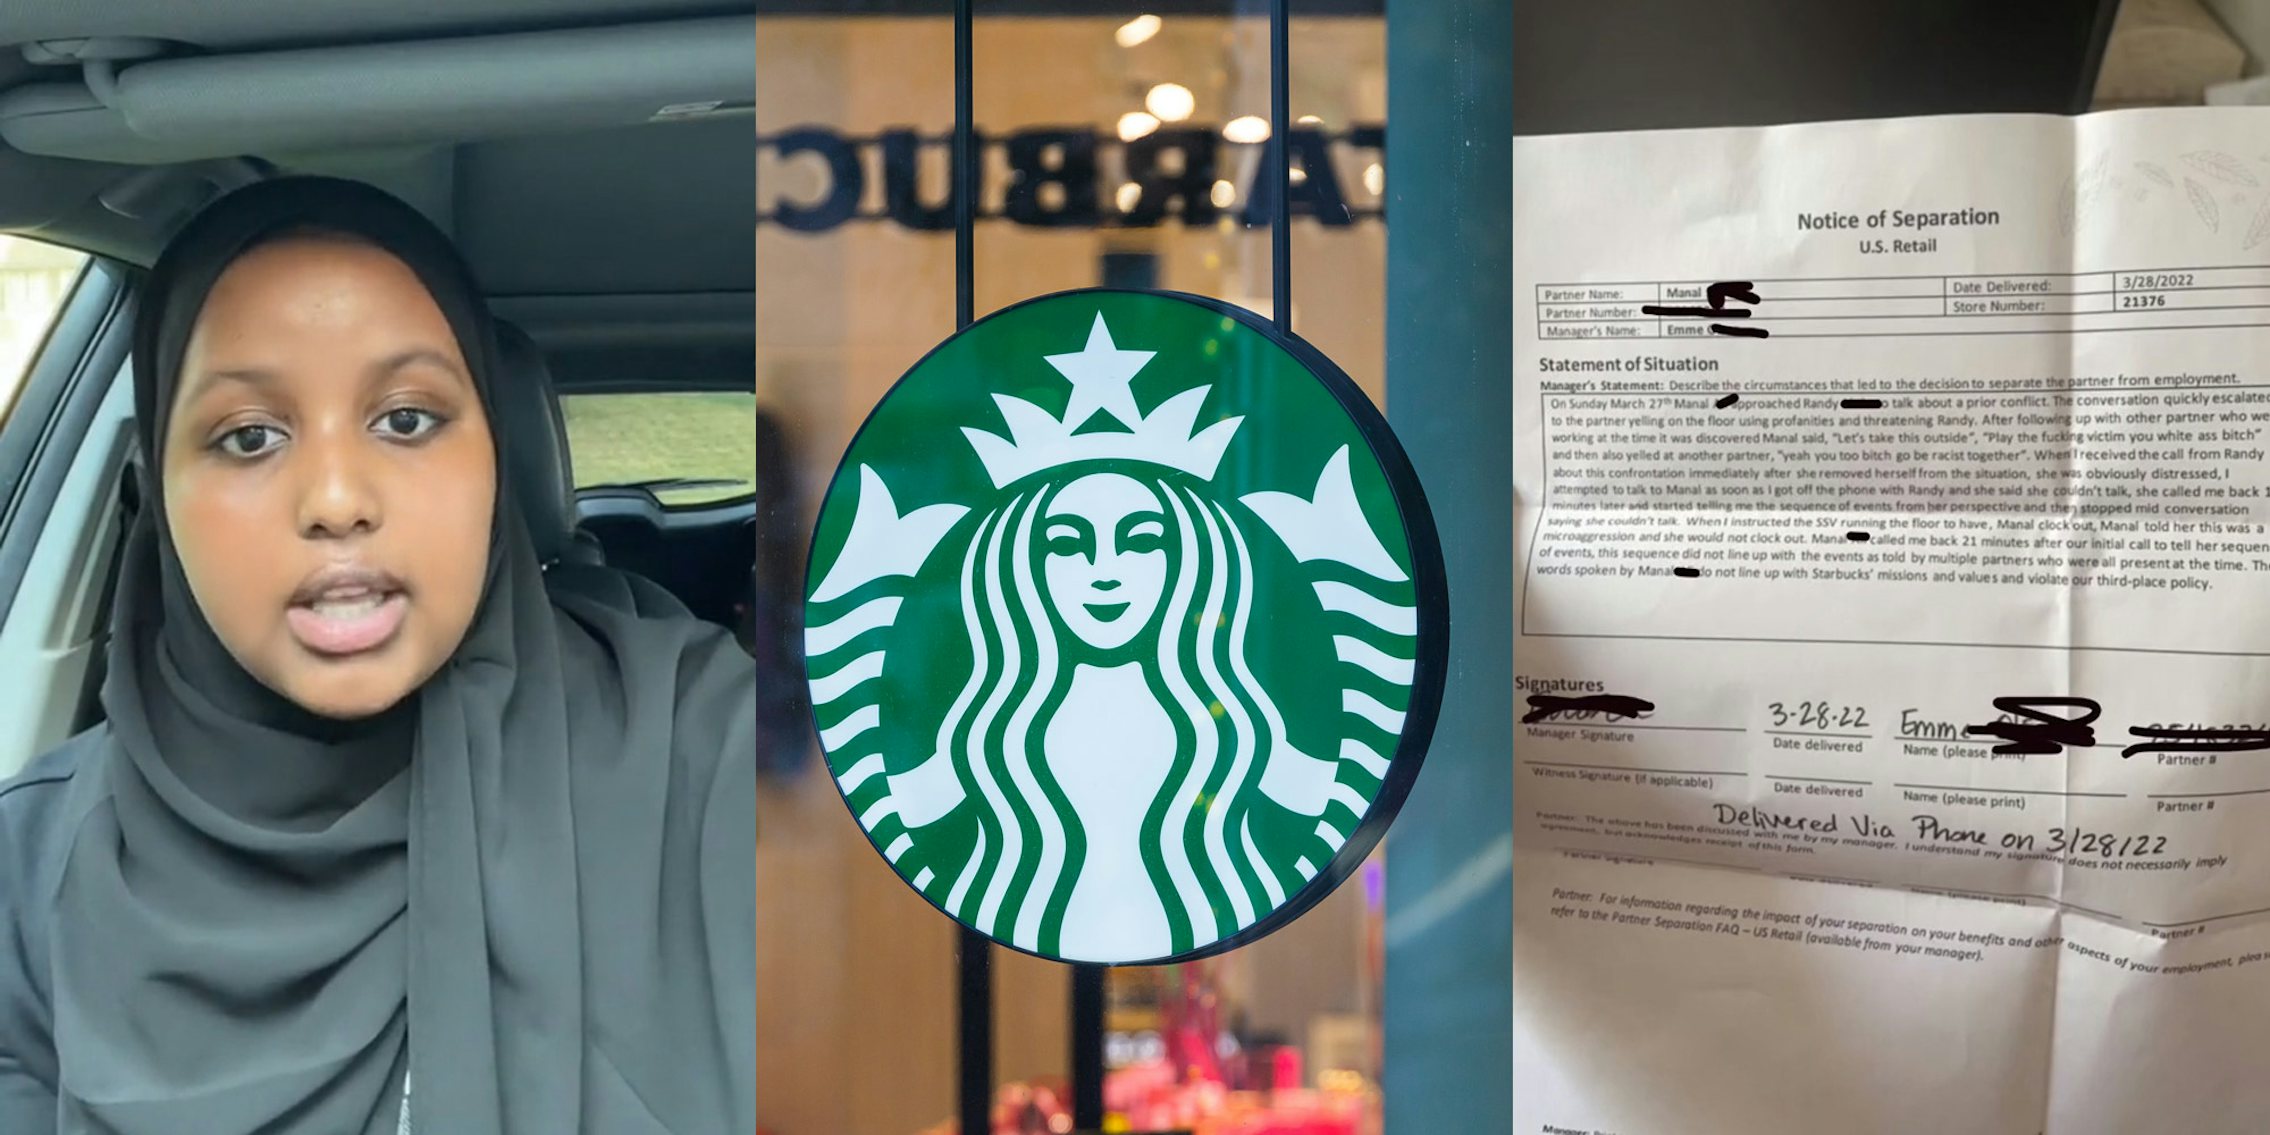 woman speaking in car (l) Starbucks sign on glass door (c) woman holding 'Notice of Separation' (r)